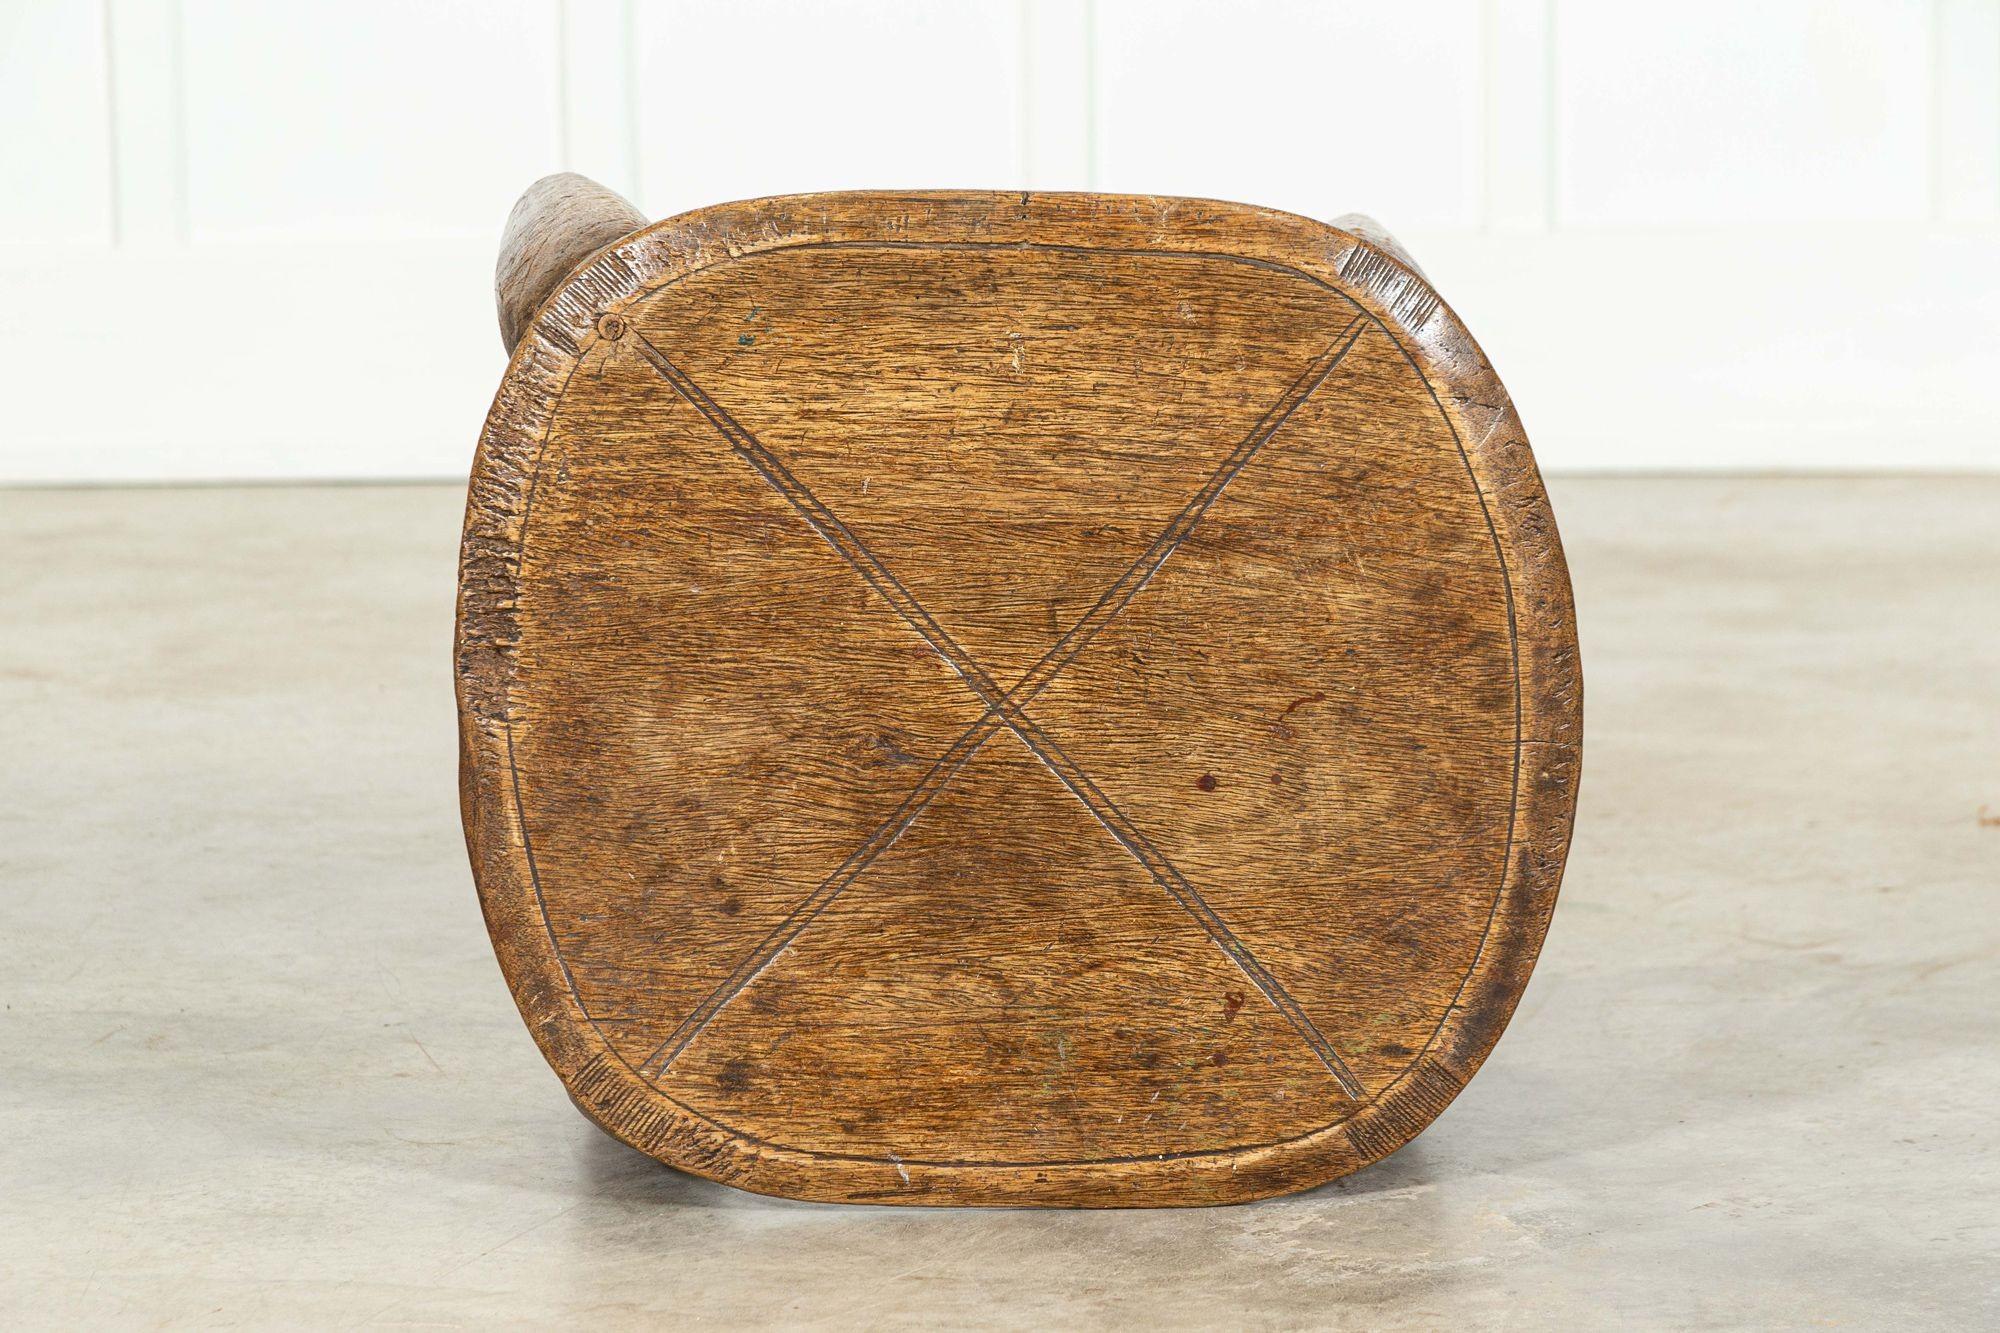 circa Mid 20thC

African Senufo Stool / Side Table

sku 1805

W55 x D49 x H33 cm
Weight 8 kg